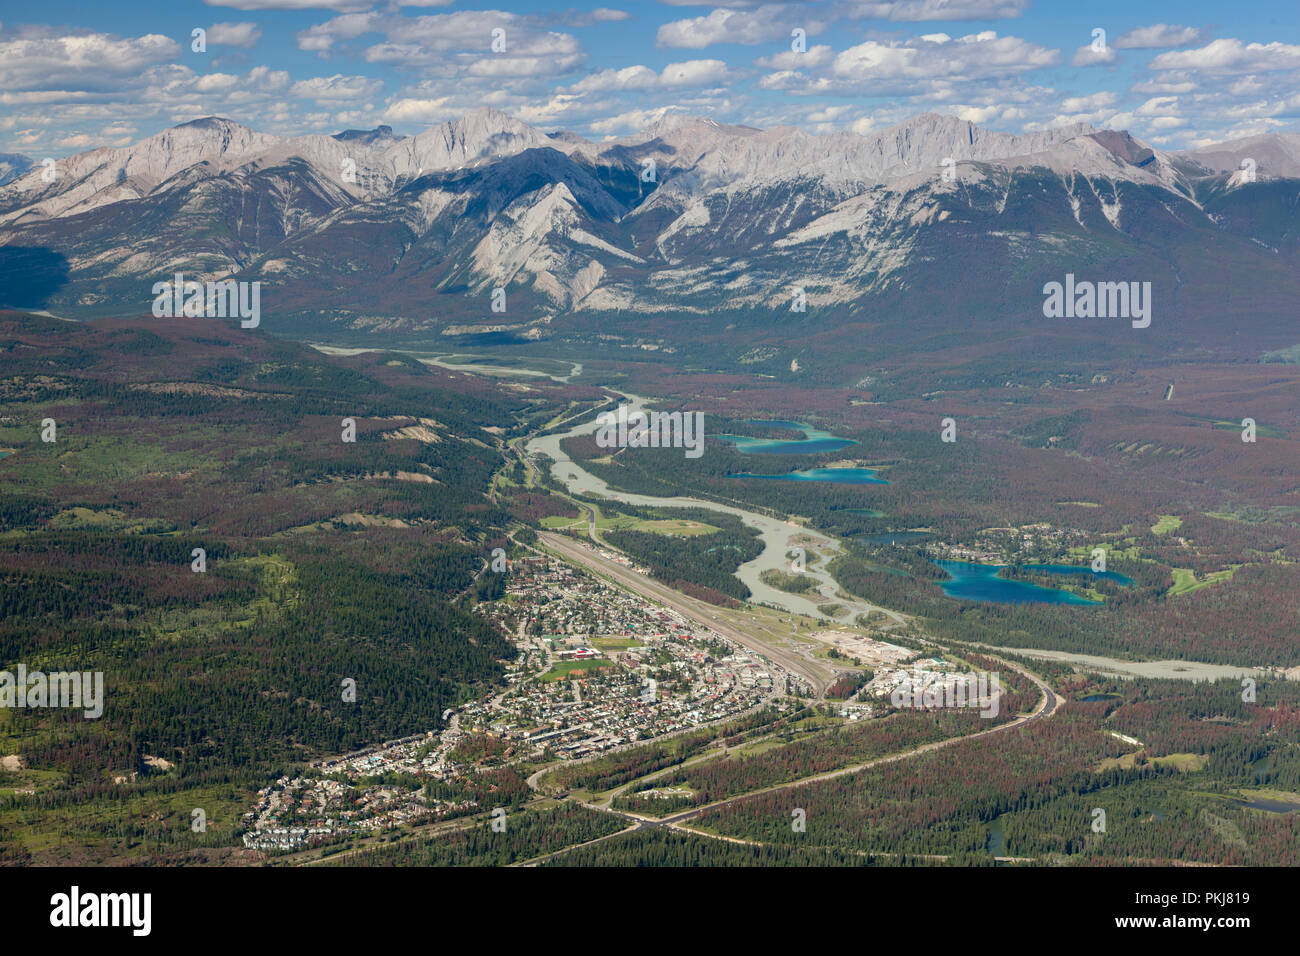 Overlooking the town of Jasper Alberta Canada from tram Stock Photo